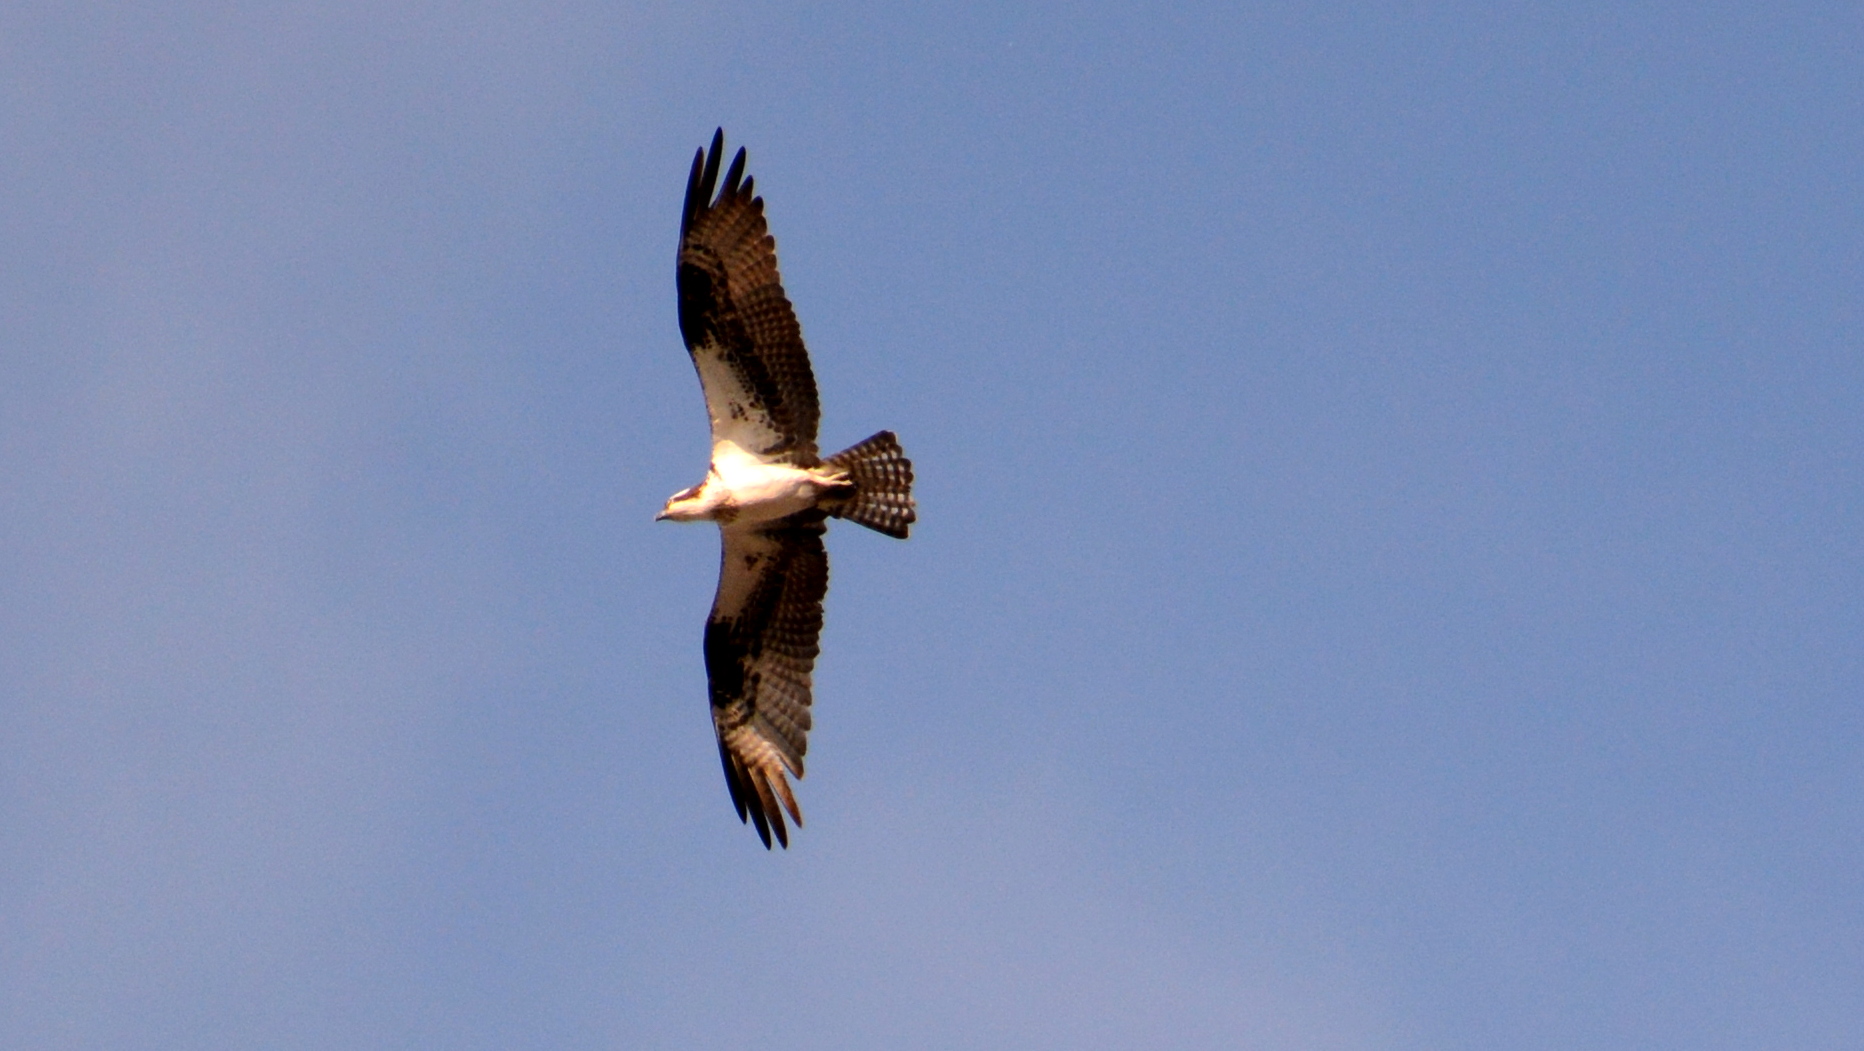 An Osprey flies over, but goes unnoticed by A & A